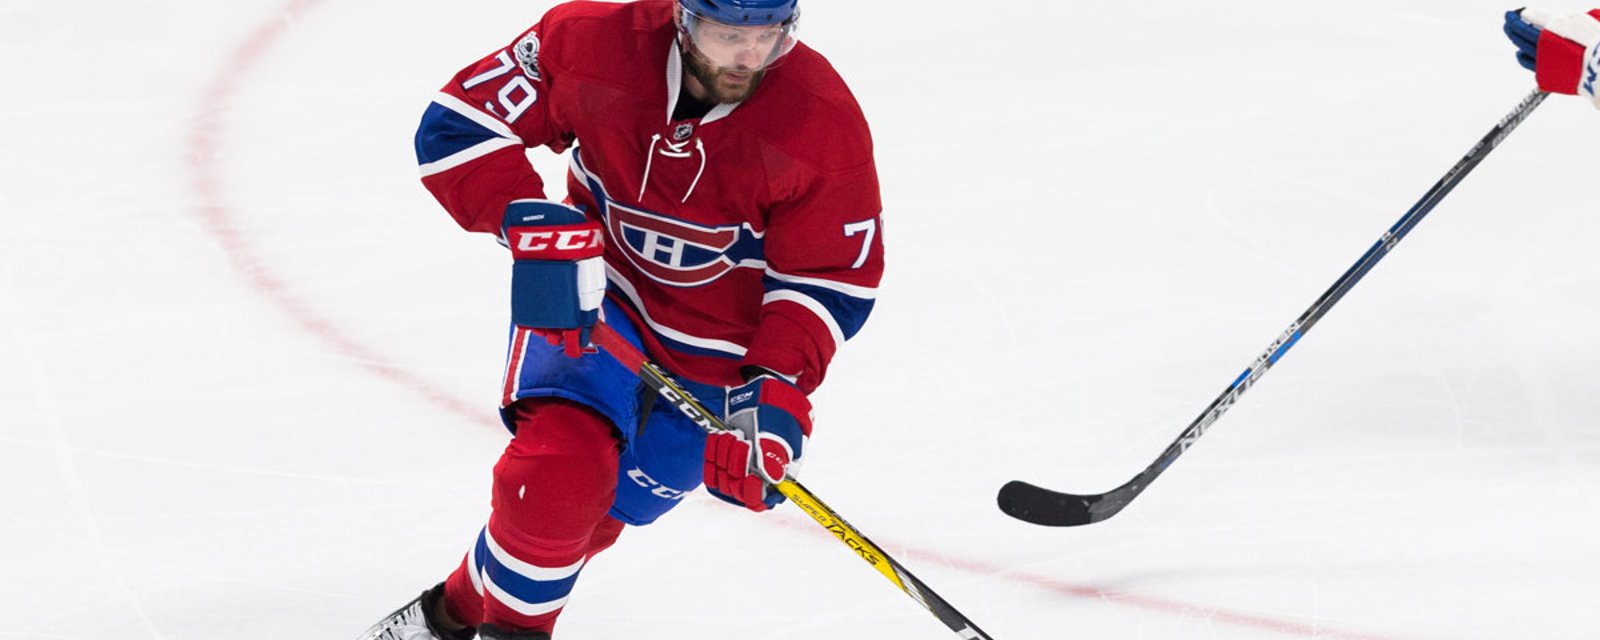 Former NHL executive explains why Markov is still available